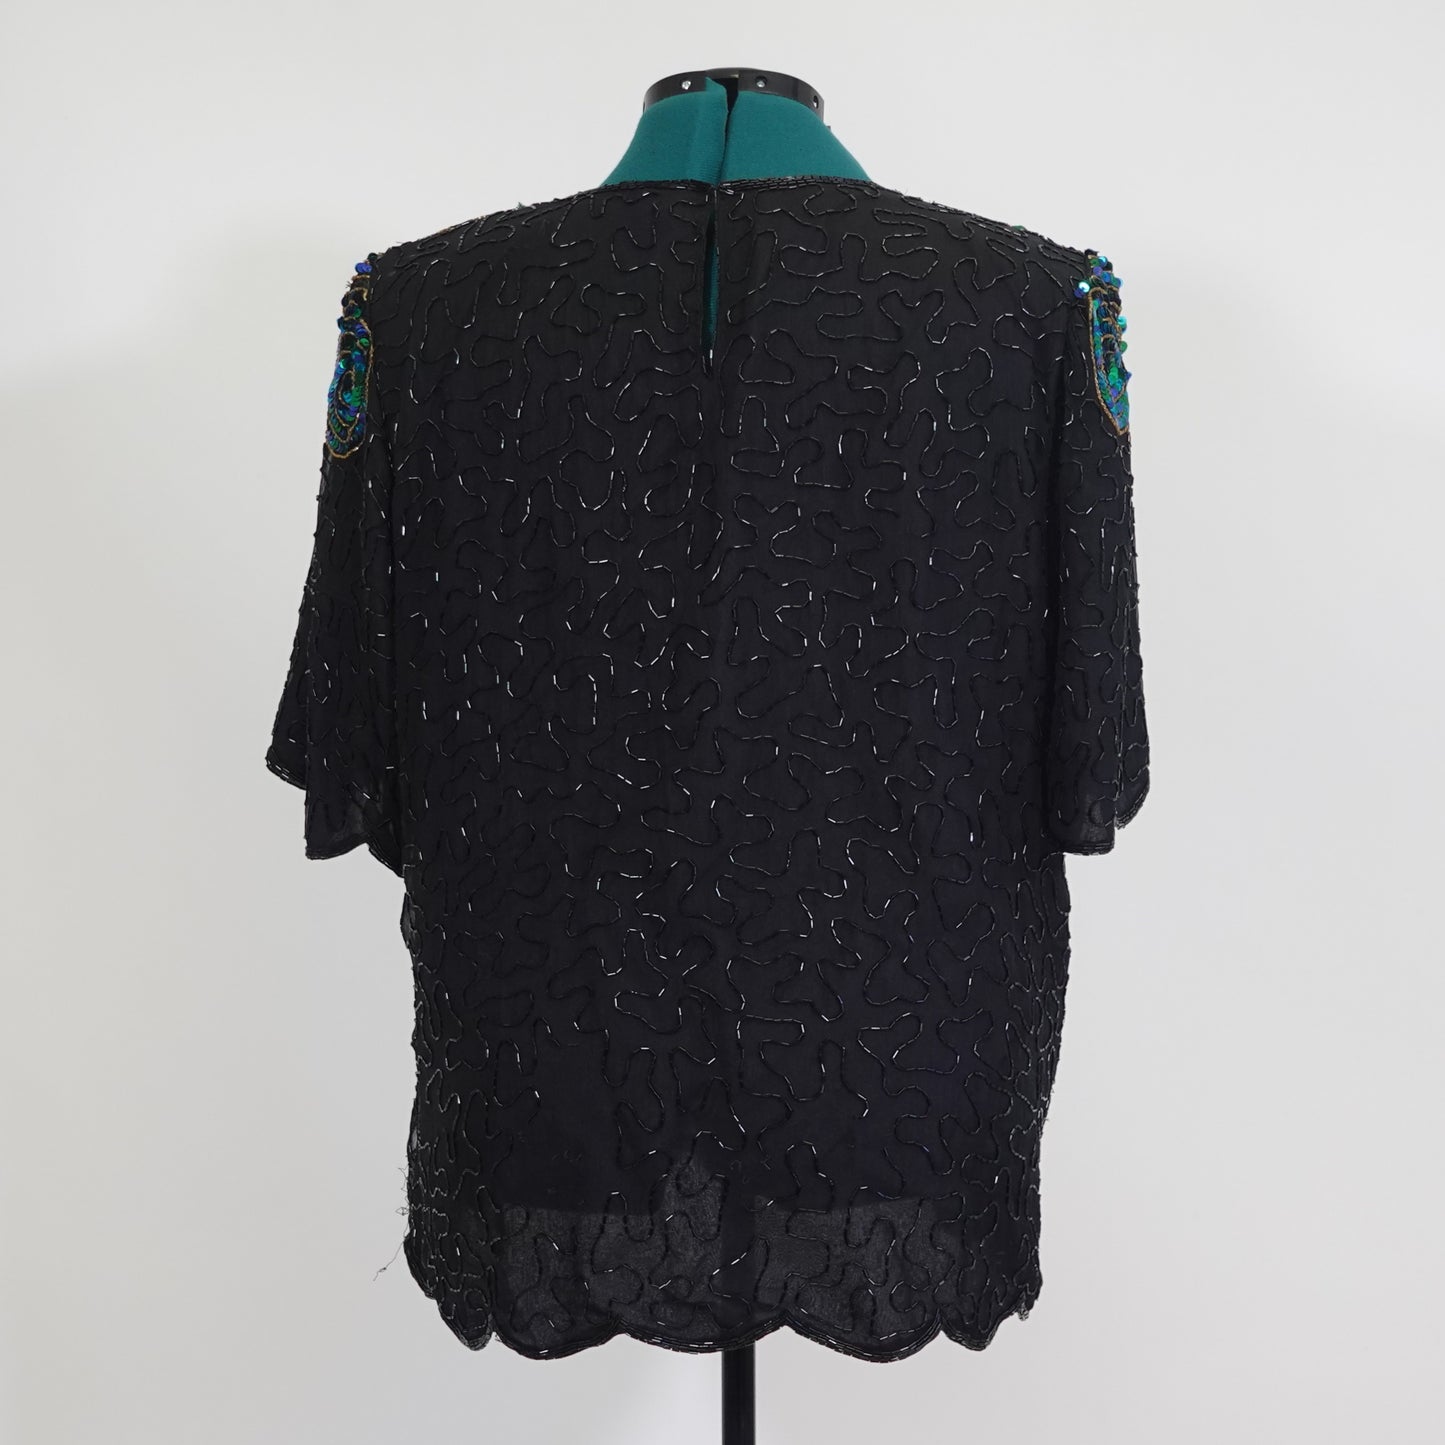 Vintage Black Beaded Top with Multicolor Details